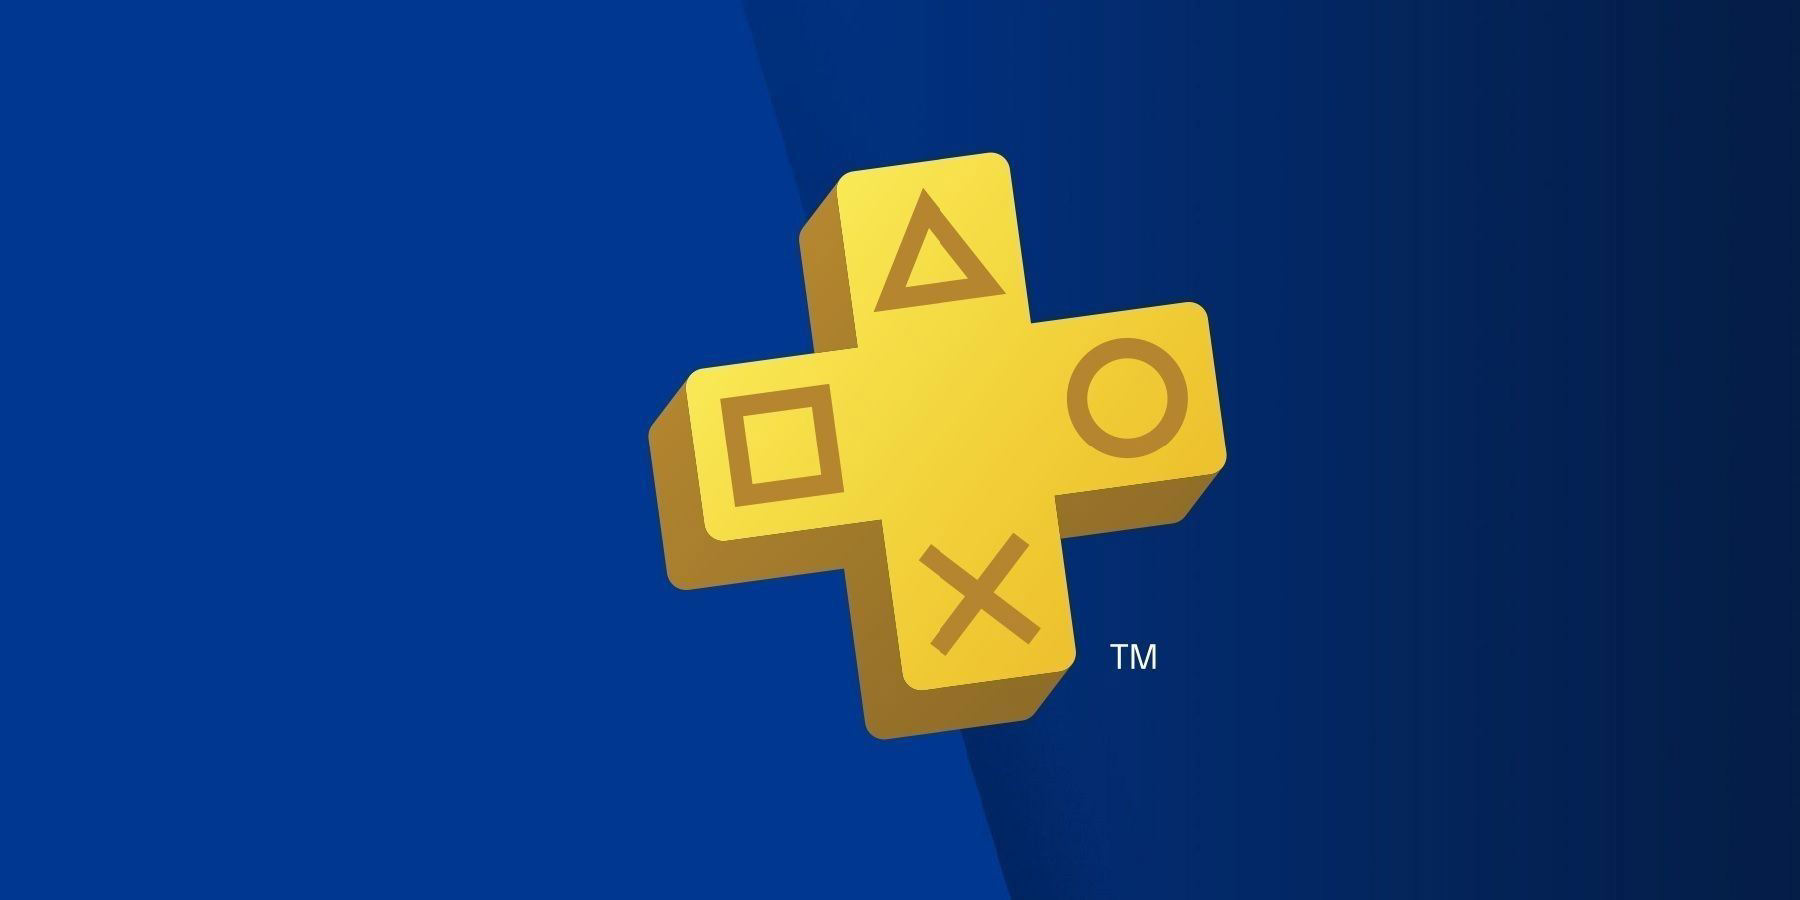 PS Plus Premium Adds New Trial for One of the HighestRated Games